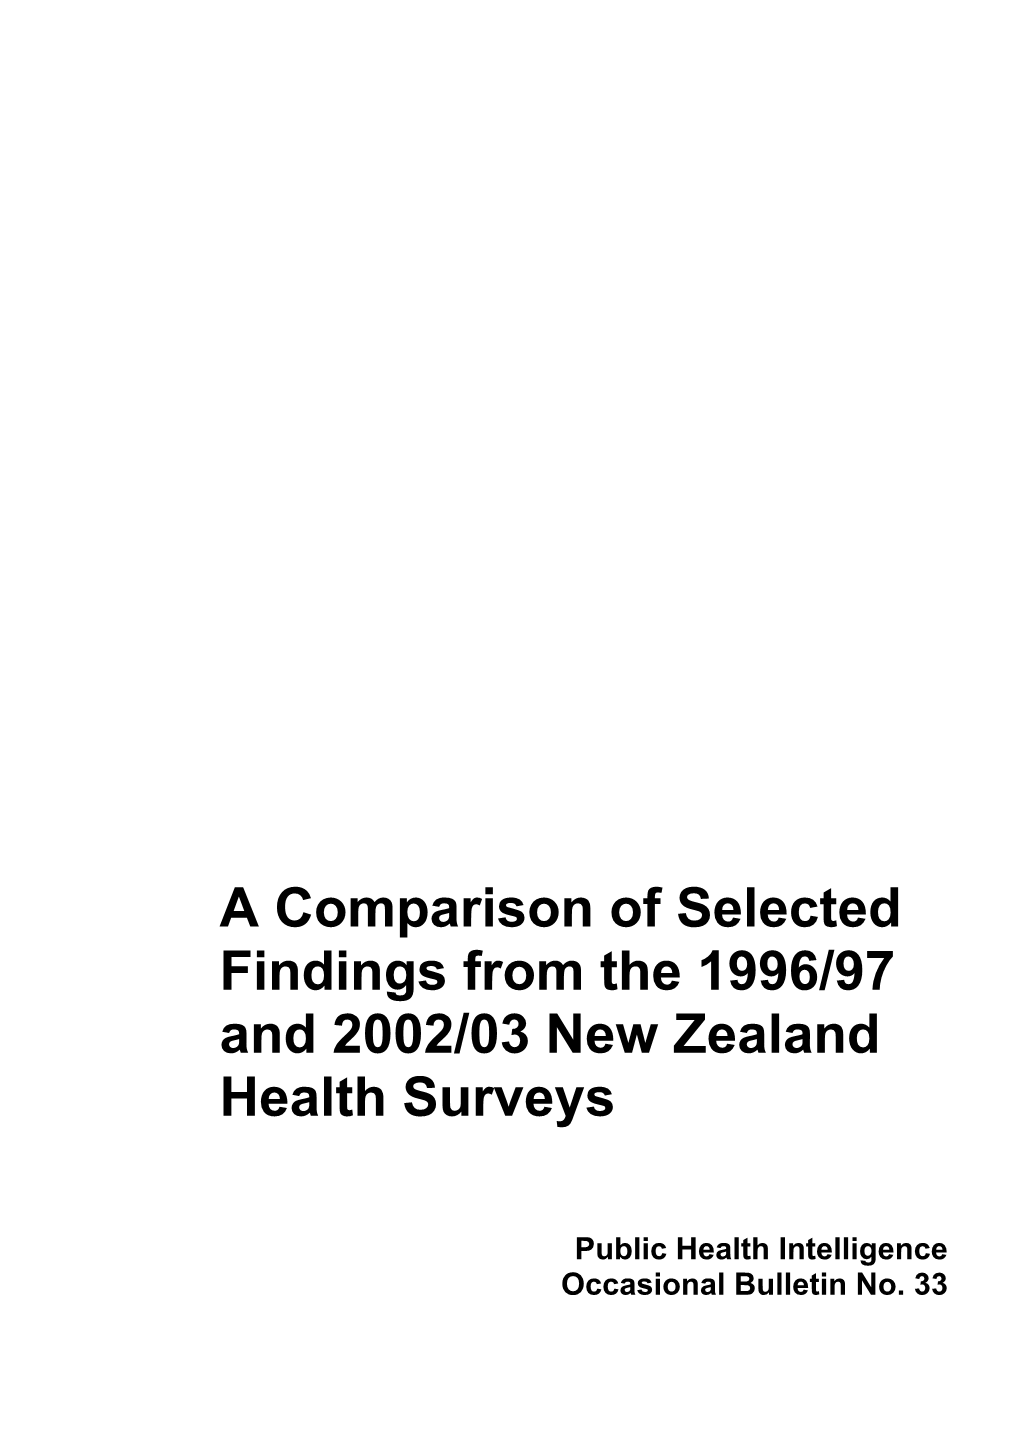 A Comparison of Selected Findings from the 1996/97 and 2002/03 New Zealand Health Surveys